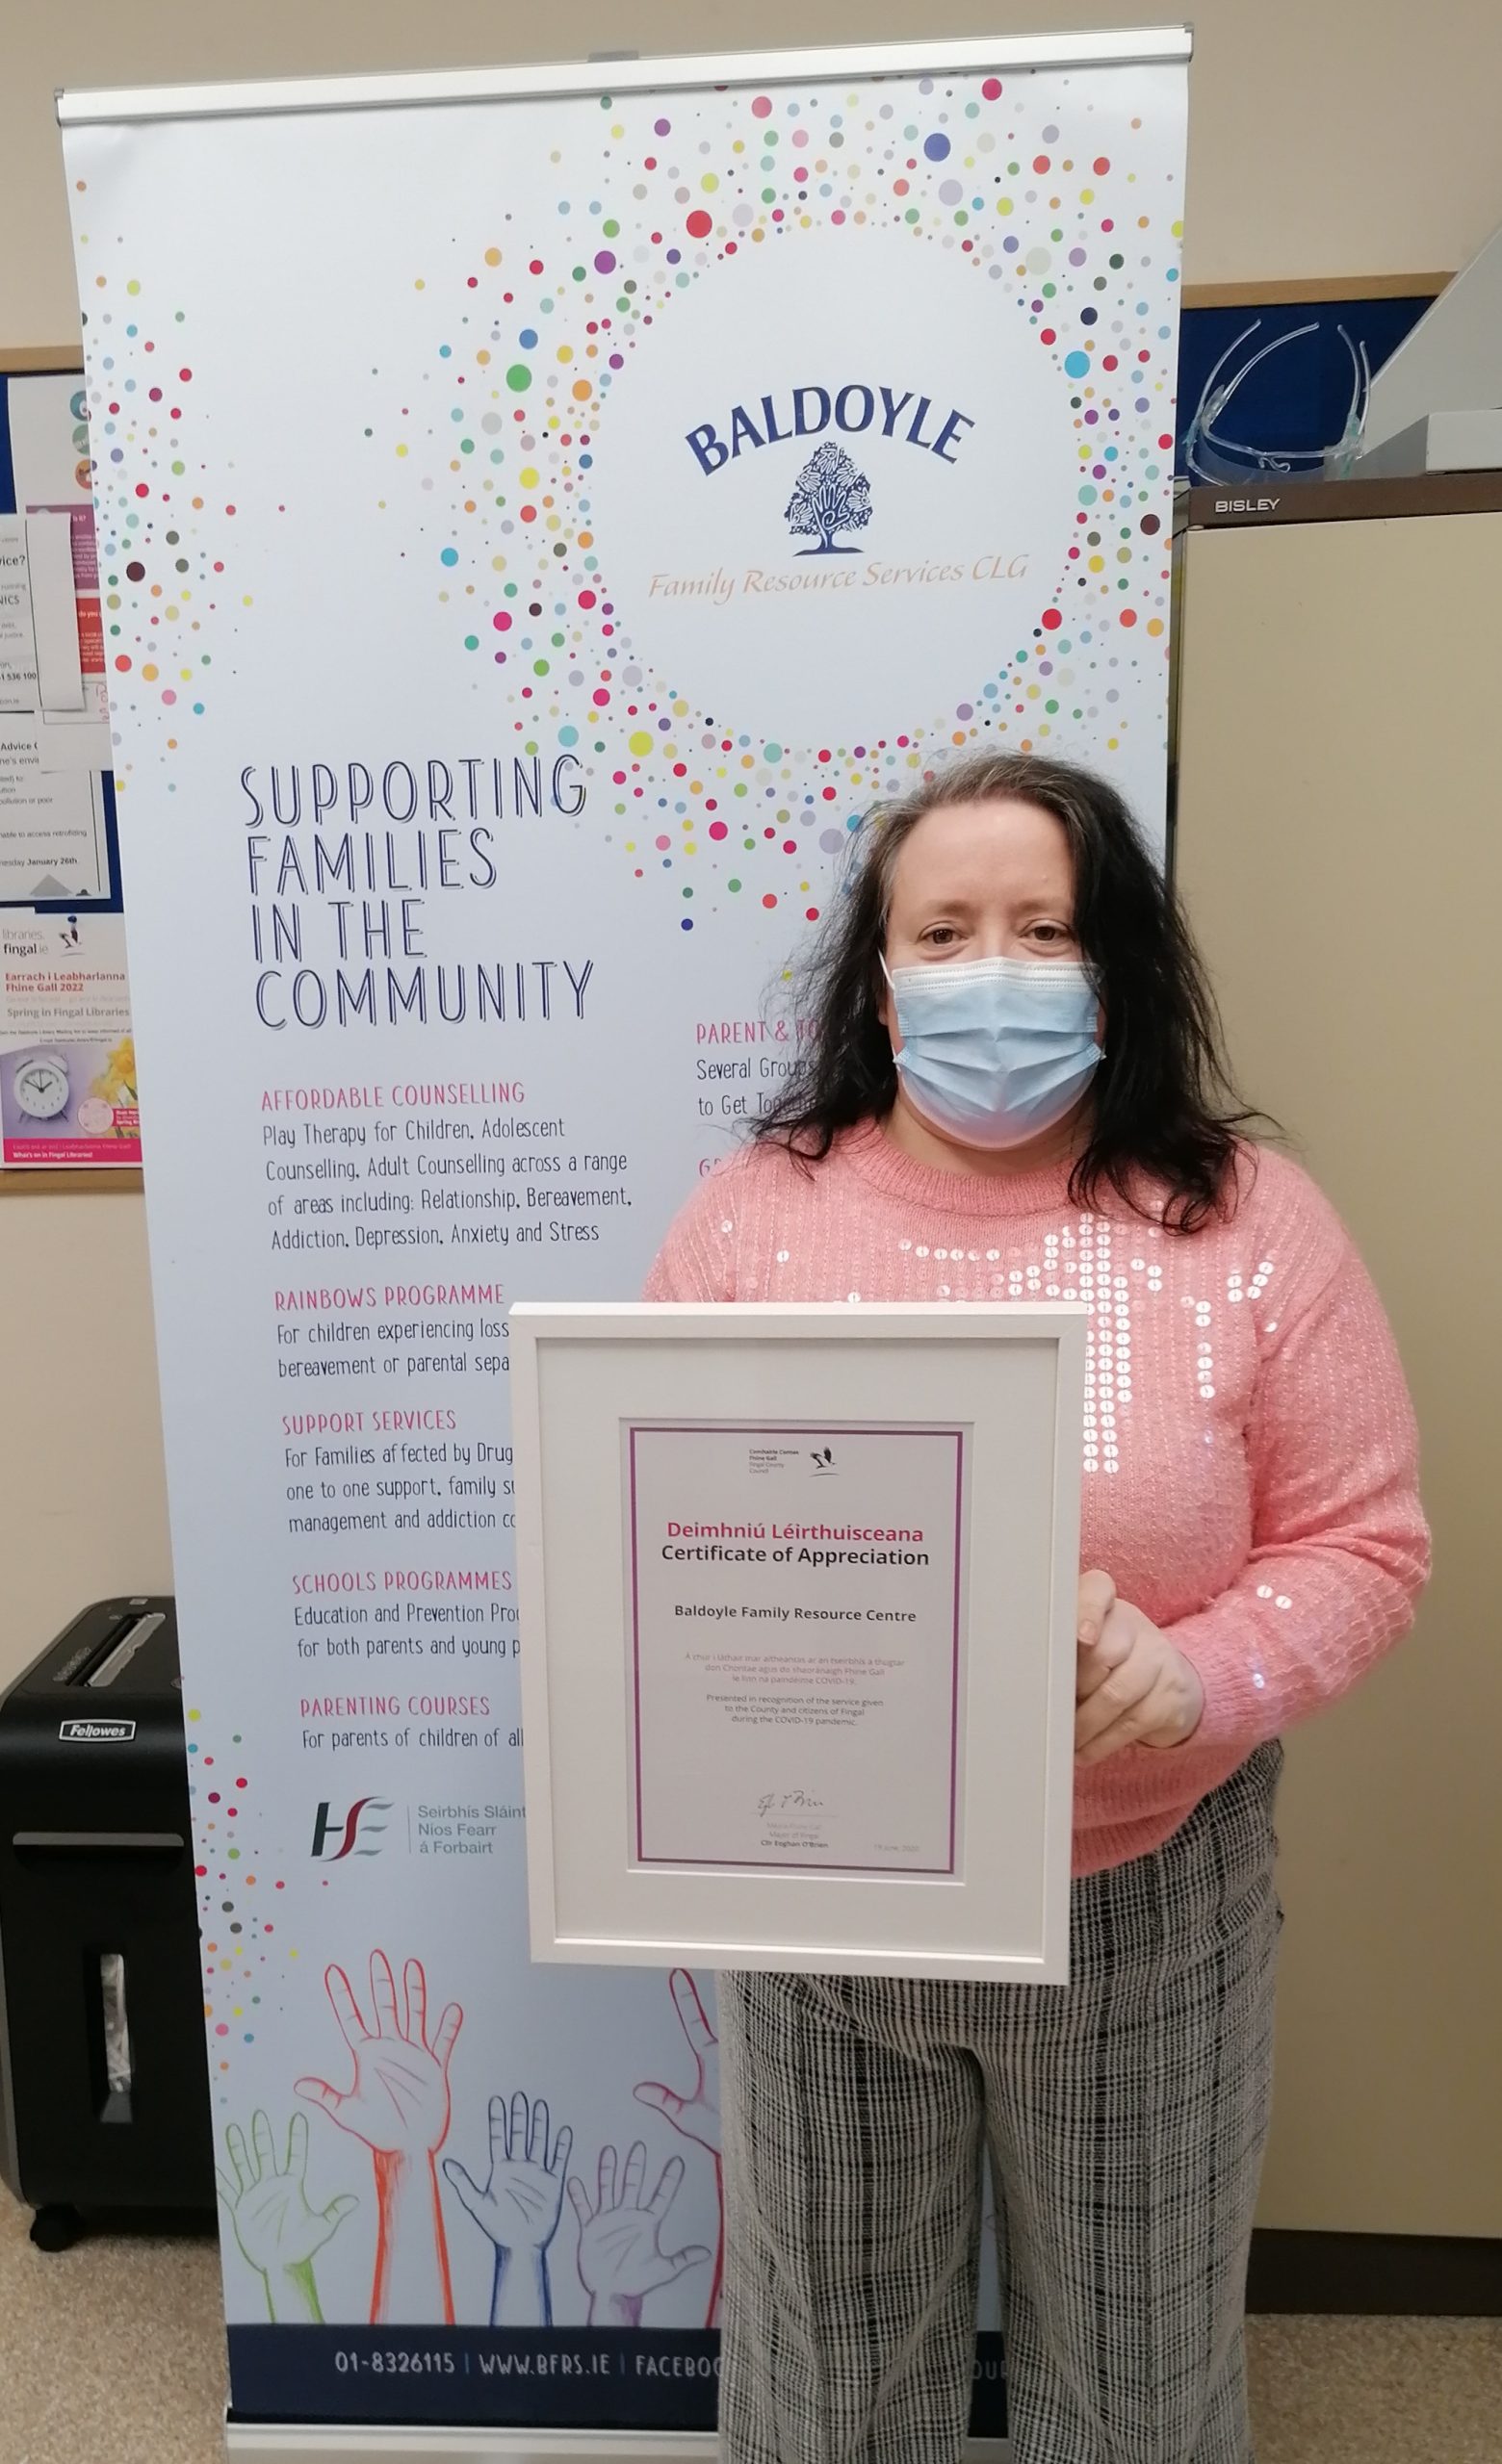 You are currently viewing Baldoyle Family Resource Services accepts Certificate of Appreciation